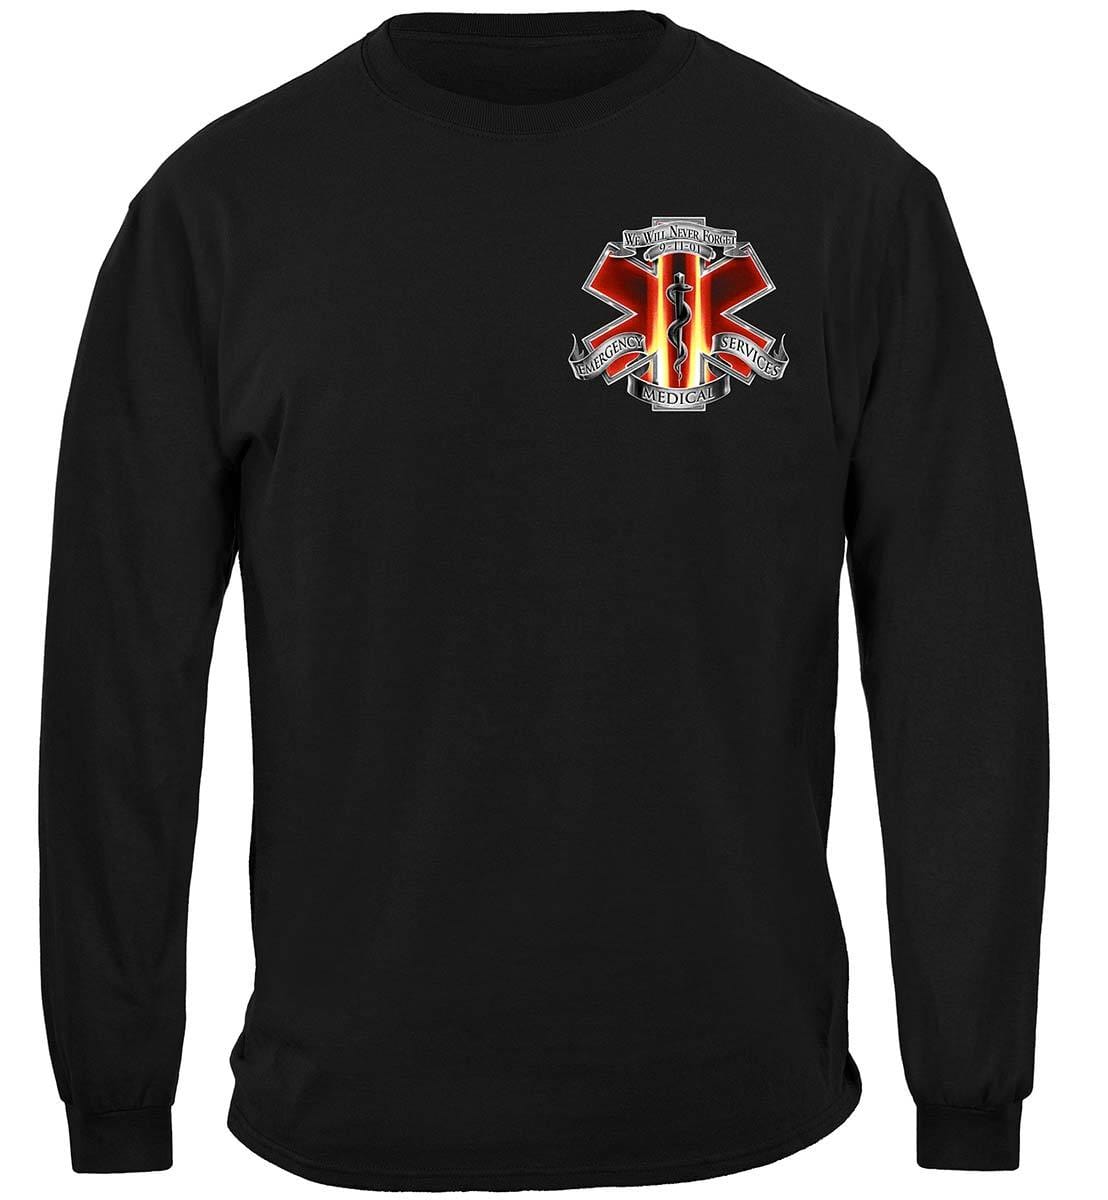 Red High Honors EMS Premium Hooded Sweat Shirt